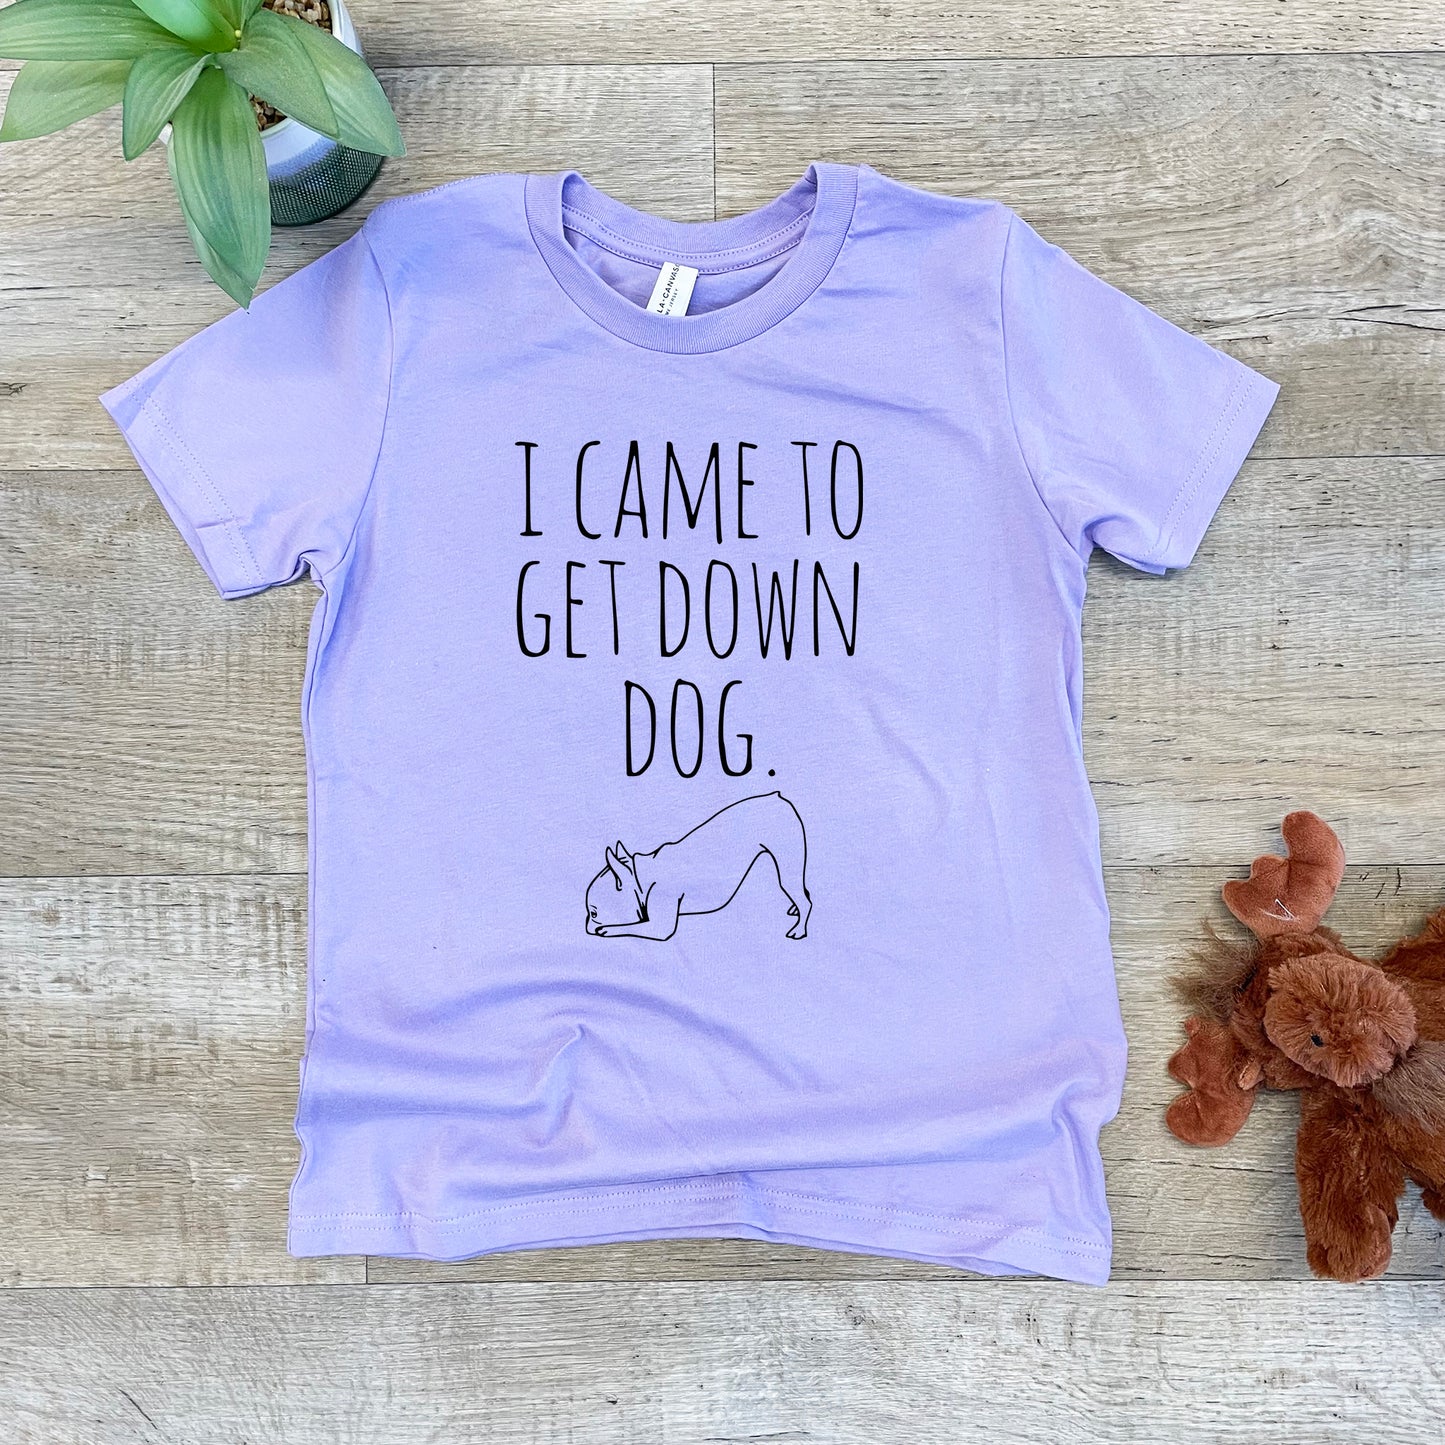 I Came To Get Down Dog (Yoga/ French Bulldog) - Kid's Tee - Columbia Blue or Lavender